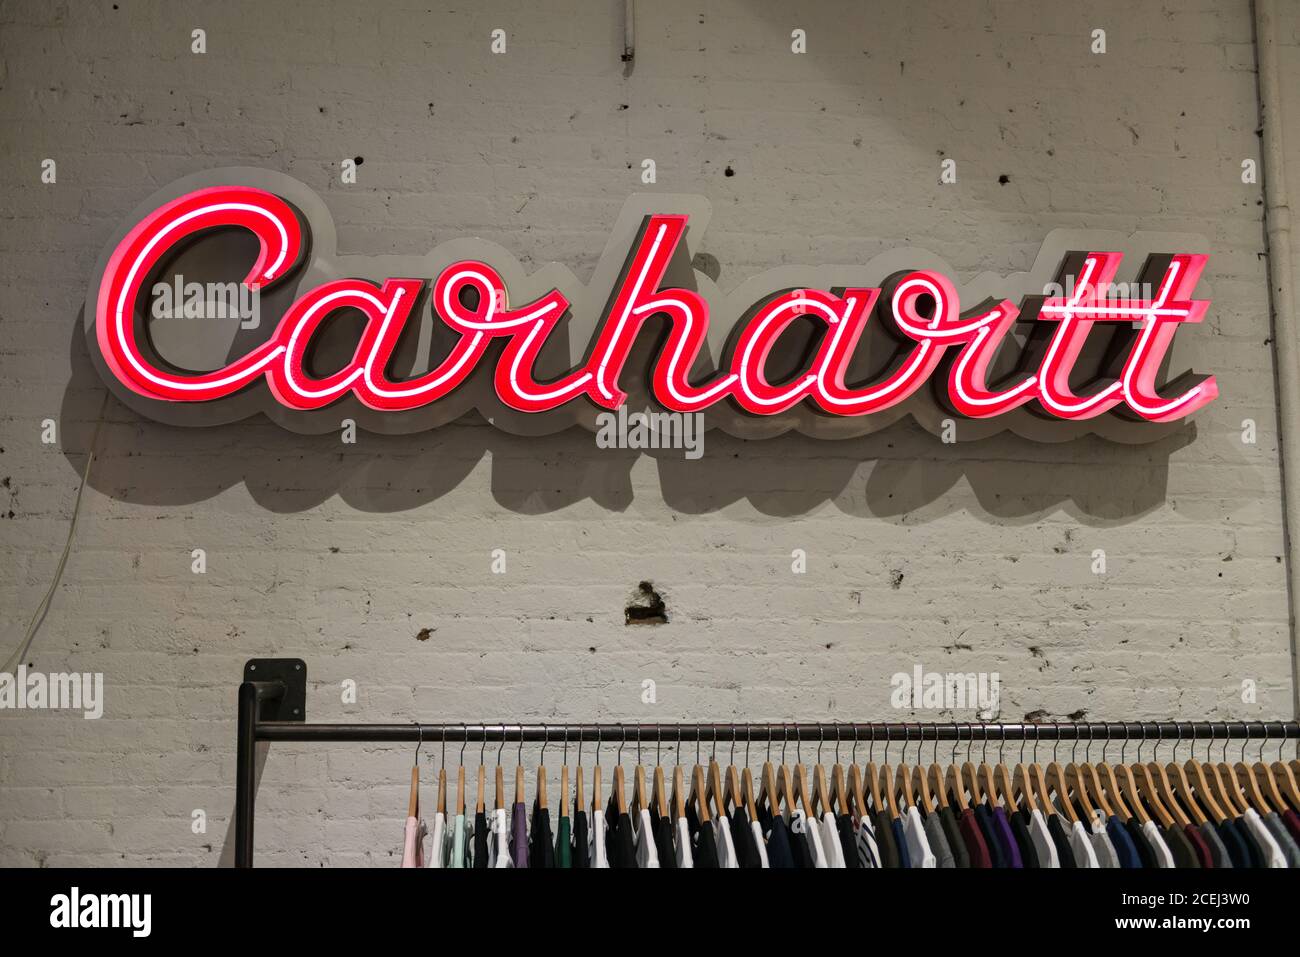 Carhartt High Resolution Stock Photography and Images - Alamy